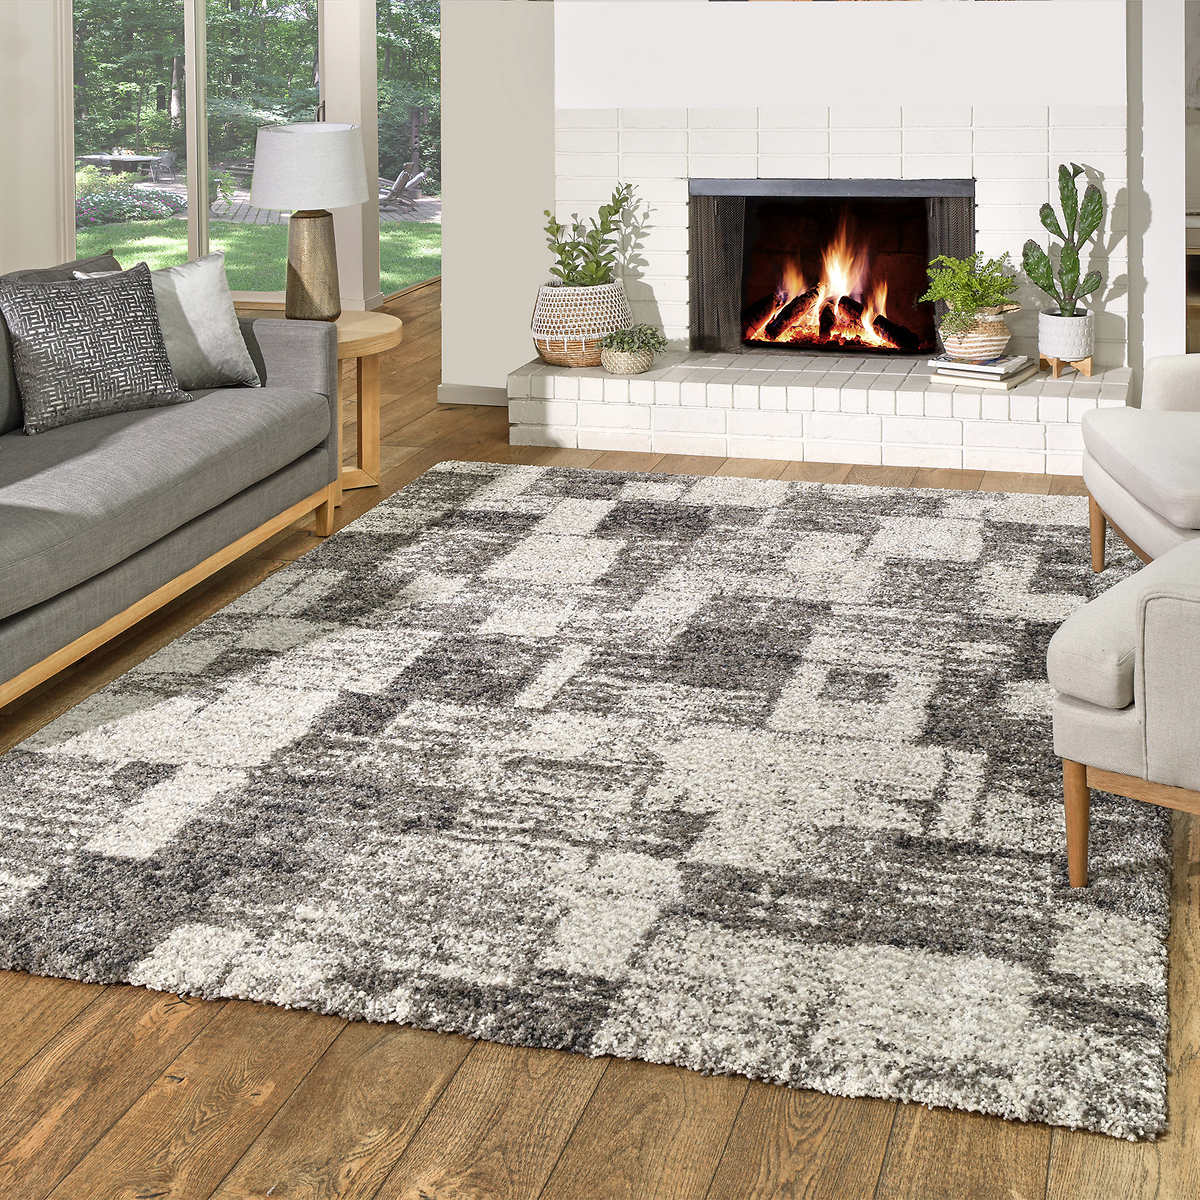 Living Room Floor Mat Bedroom Carpets Time to Travel Car Cloud Kitchen Area Rugs 